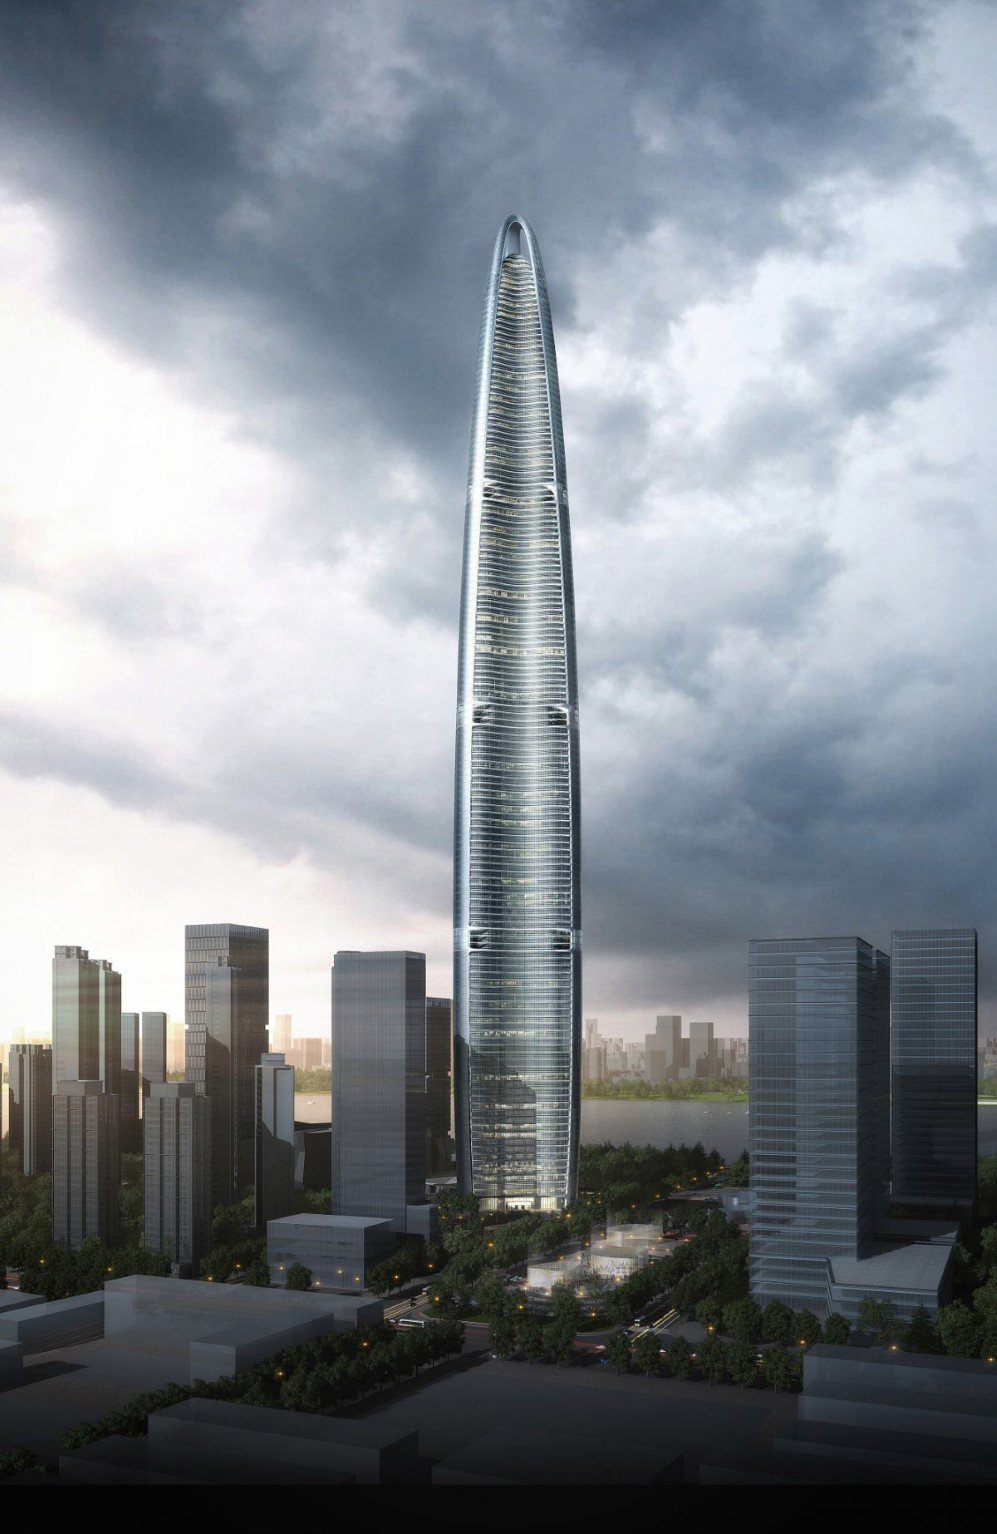 4. Wuhan Greenland Centre, Wuhan, China